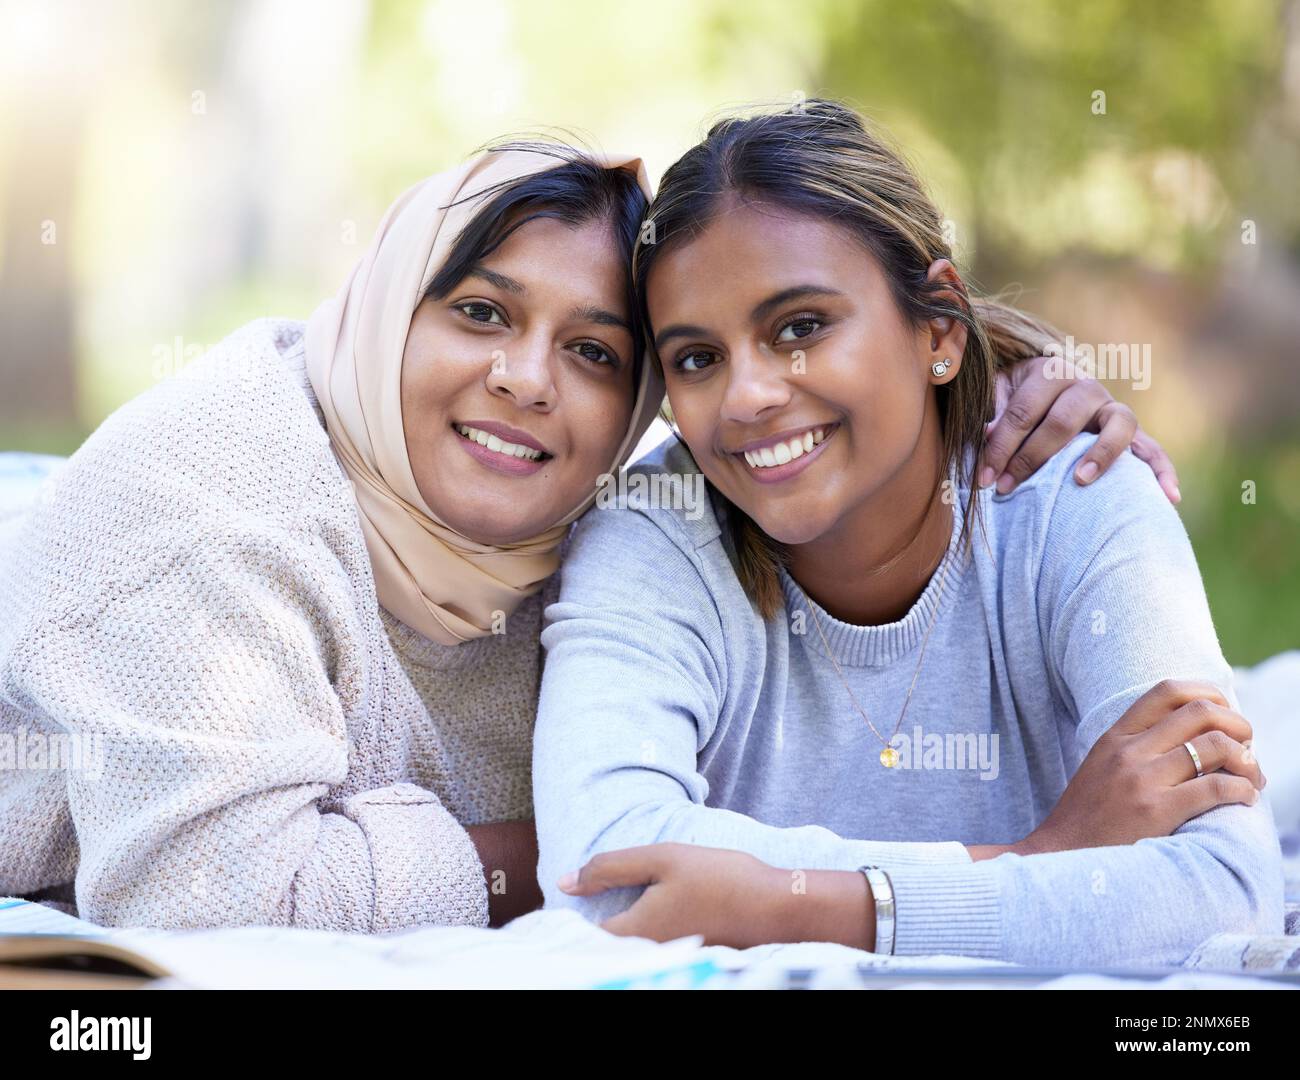 Muslim women, portrait or hug in park, garden or school campus for relax bonding, friends picnic or community support. Smile, happy or Islamic Stock Photo